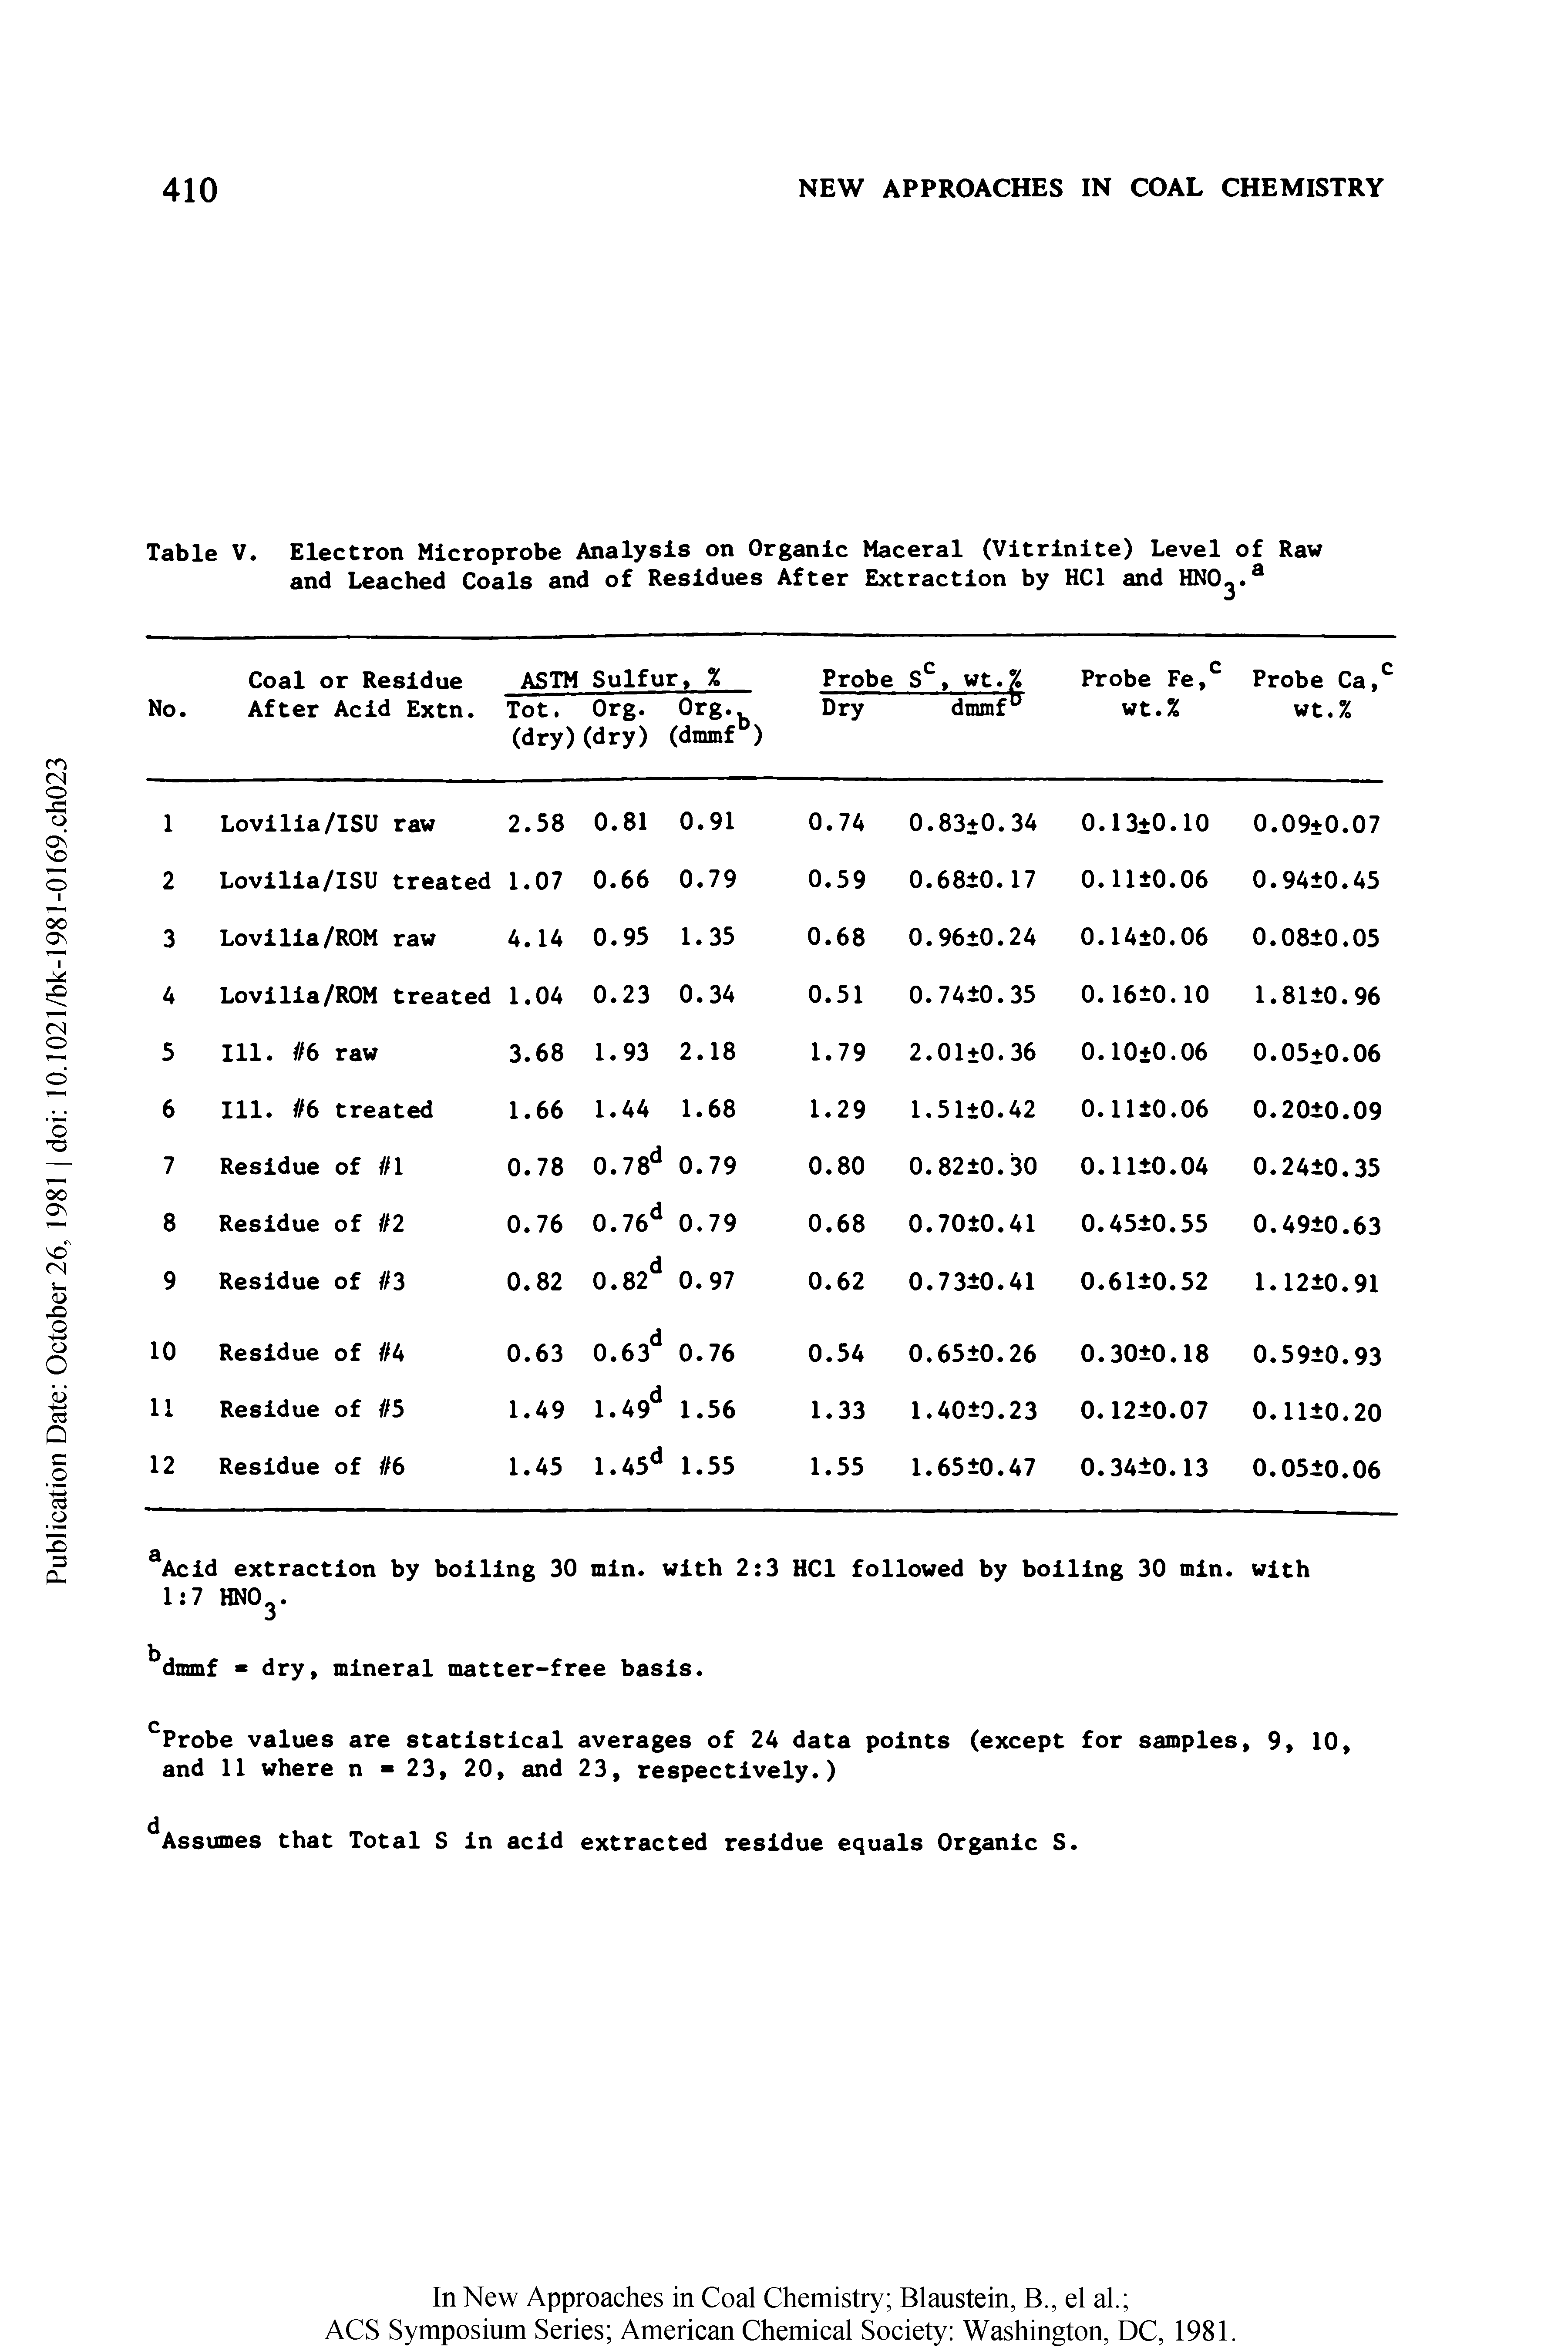 Table V. Electron Microprobe Analysis on Organic Maceral (Vitrinite) Level of Raw and Leached Coals and of Residues After Extraction by HC1 and HN0. a...